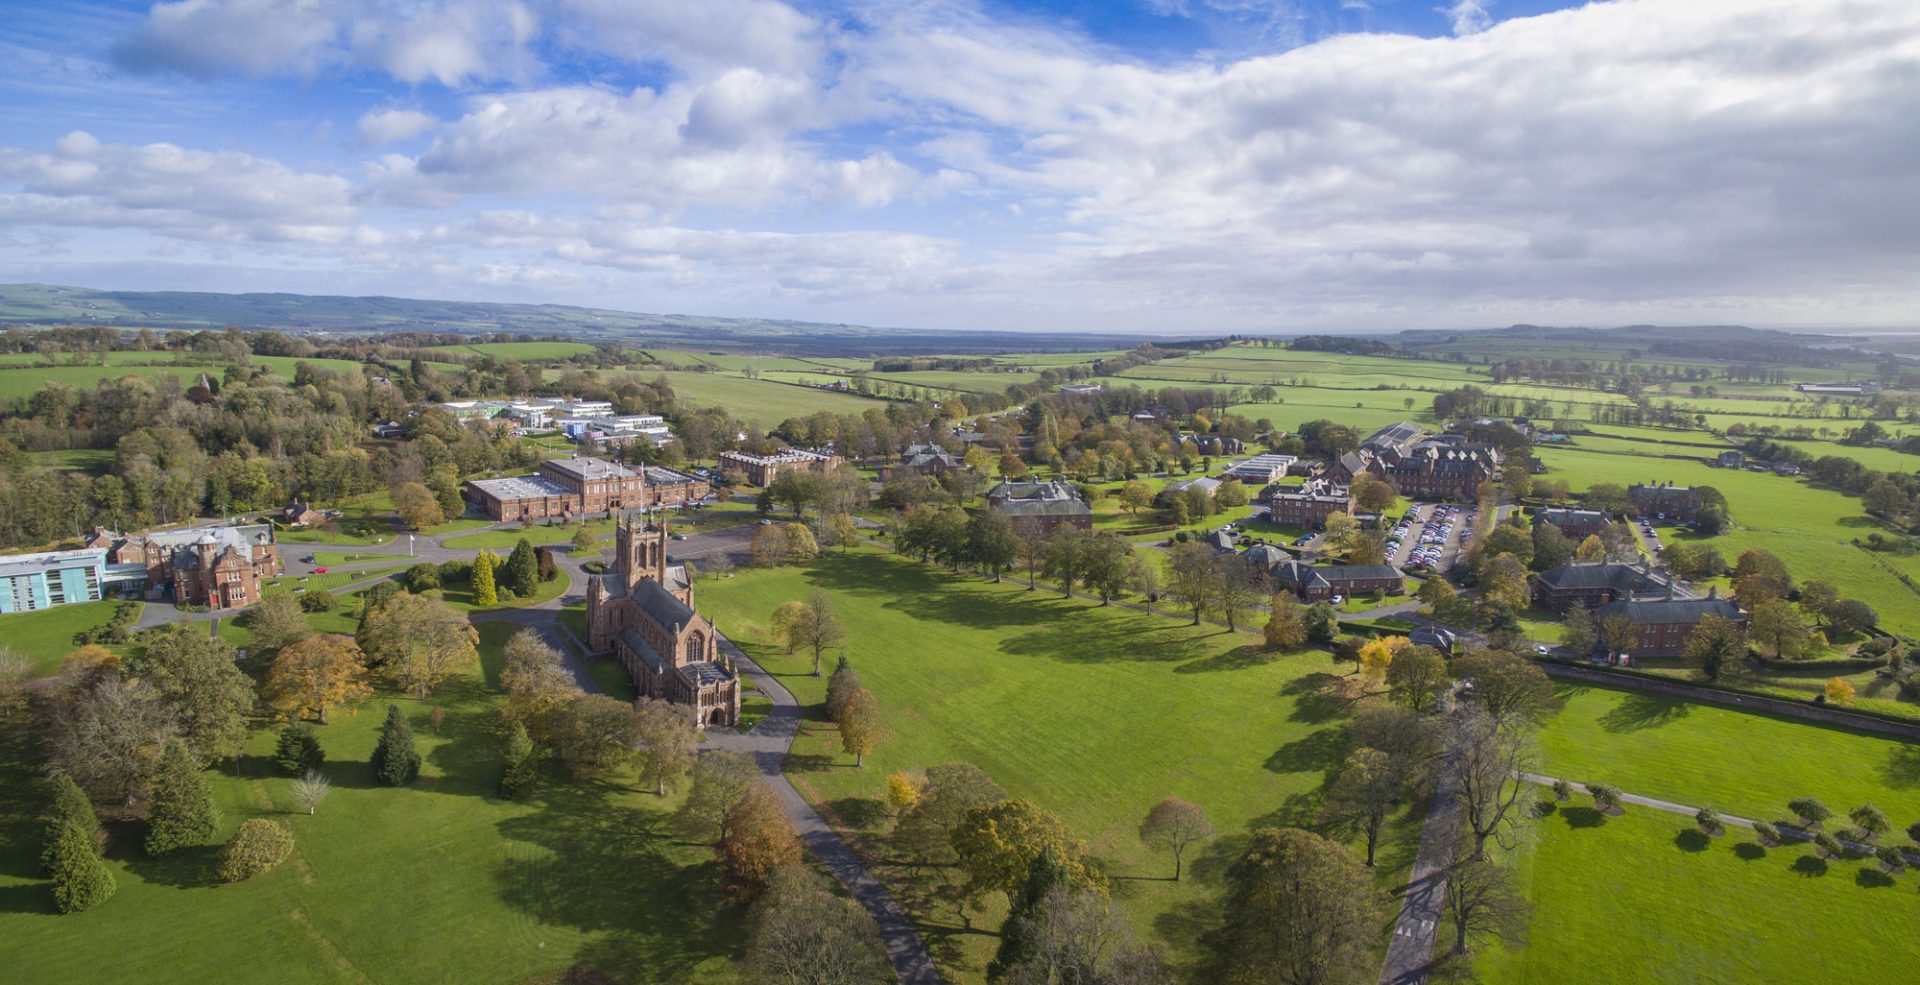 A photo of The Crichton Estate, a beautiful park in Dumfries, Scotland, featuring stunning gardens and architecture, once a hospital, now serving as a campus for the University of Glasgow.